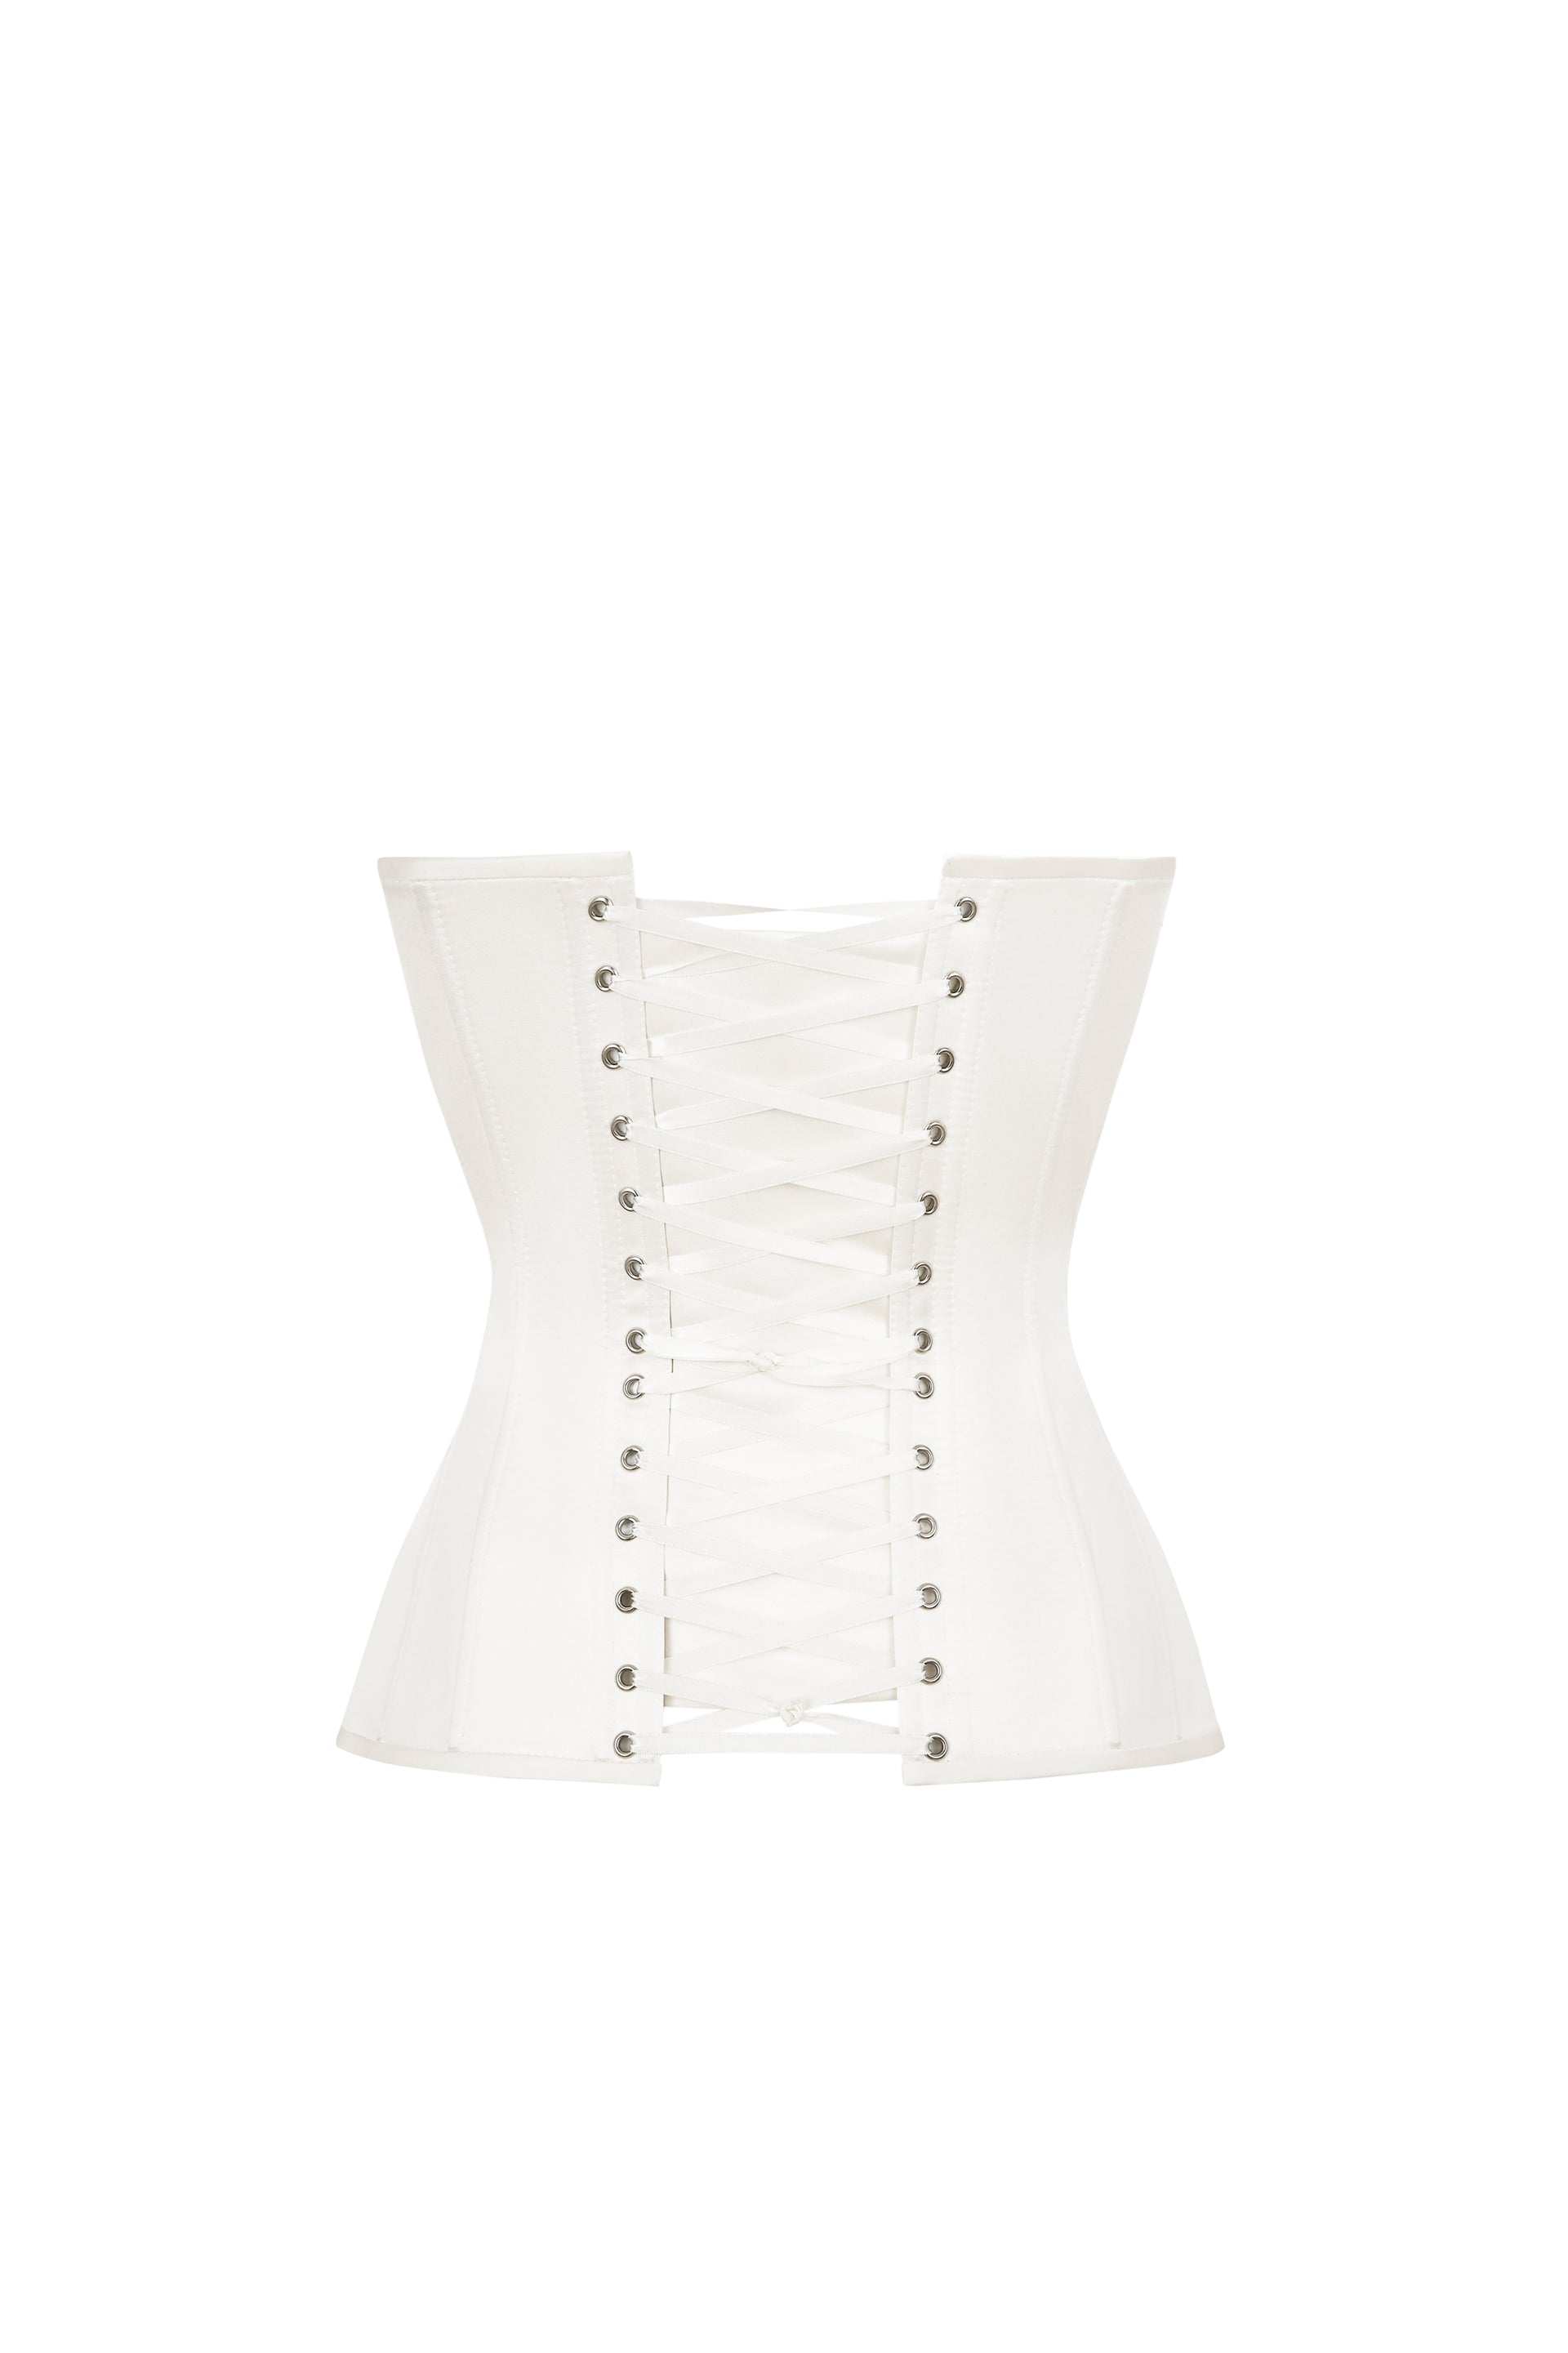 Off white satin corset with transparent reliefs